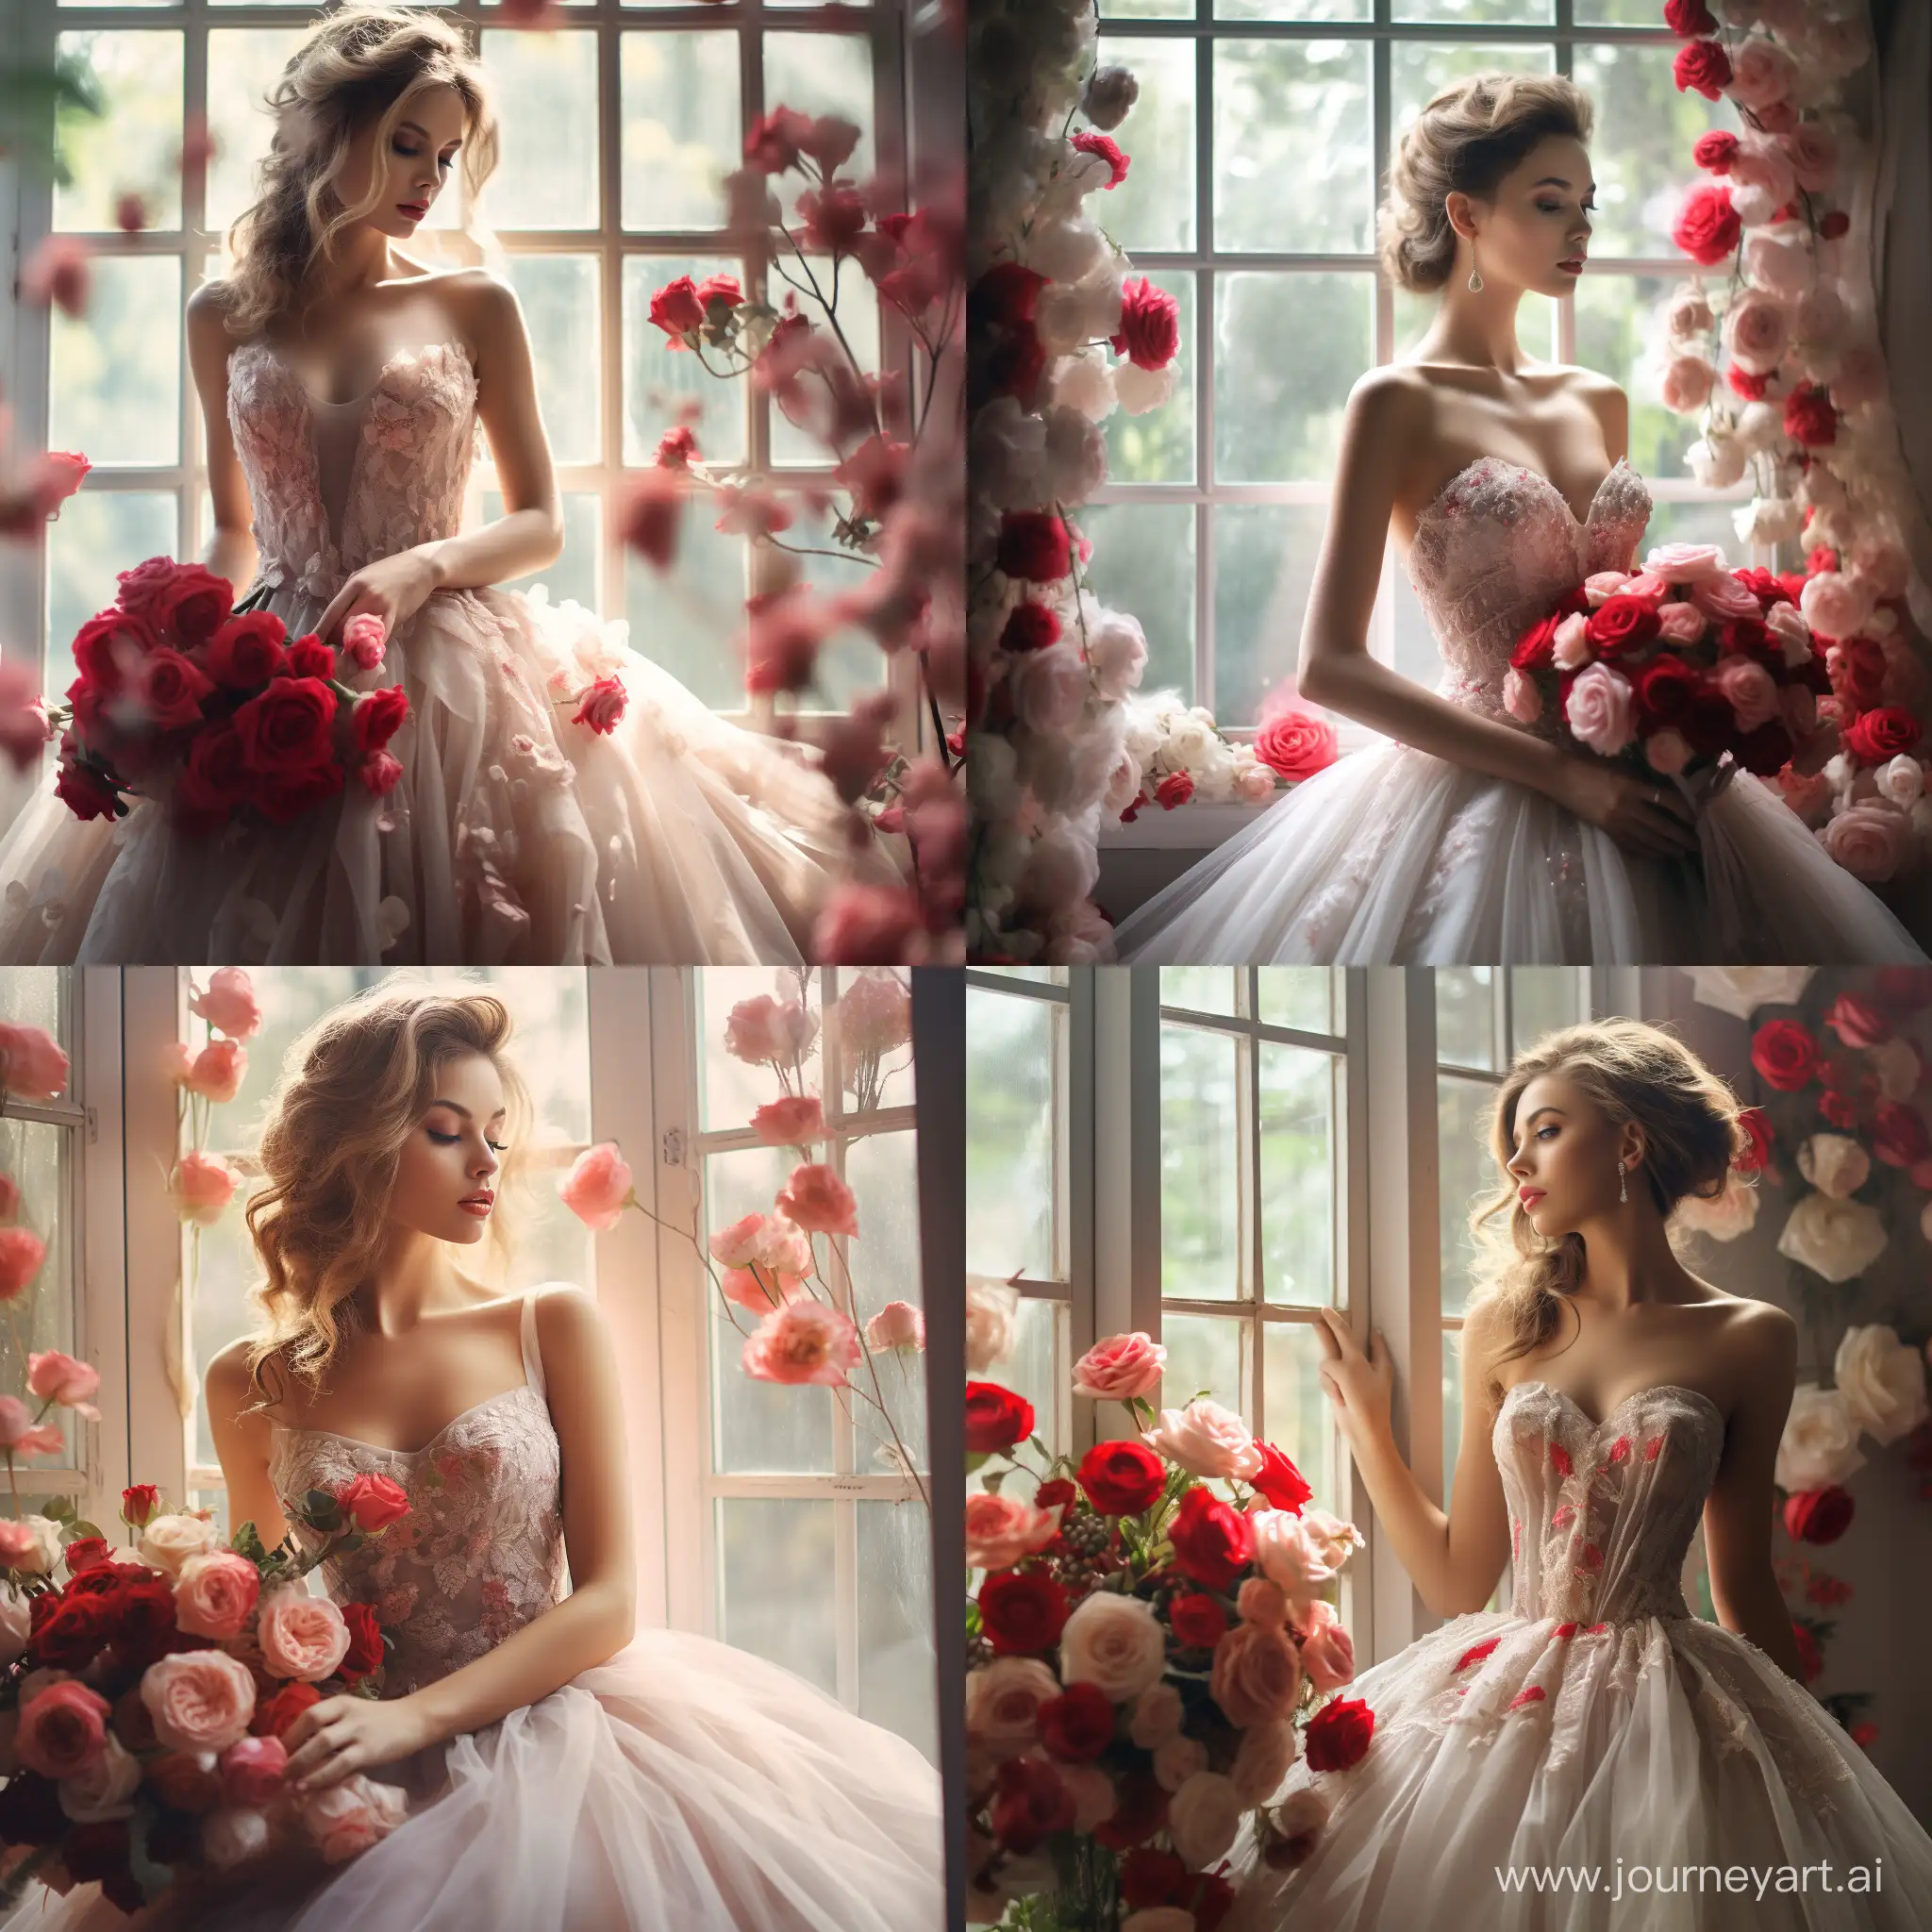 Fashion Photography, Gorgeous bride in an ethereal wedding dress, clutching a bouquet of delicate roses, Wedding venue, overlooking a picturesque garden, Portrait lighting, Impressionism, Low Key Lighting, roses, vibrant red, delicate pink, pure white, Selective focus, High Dynamic Range (HDR) --style raw